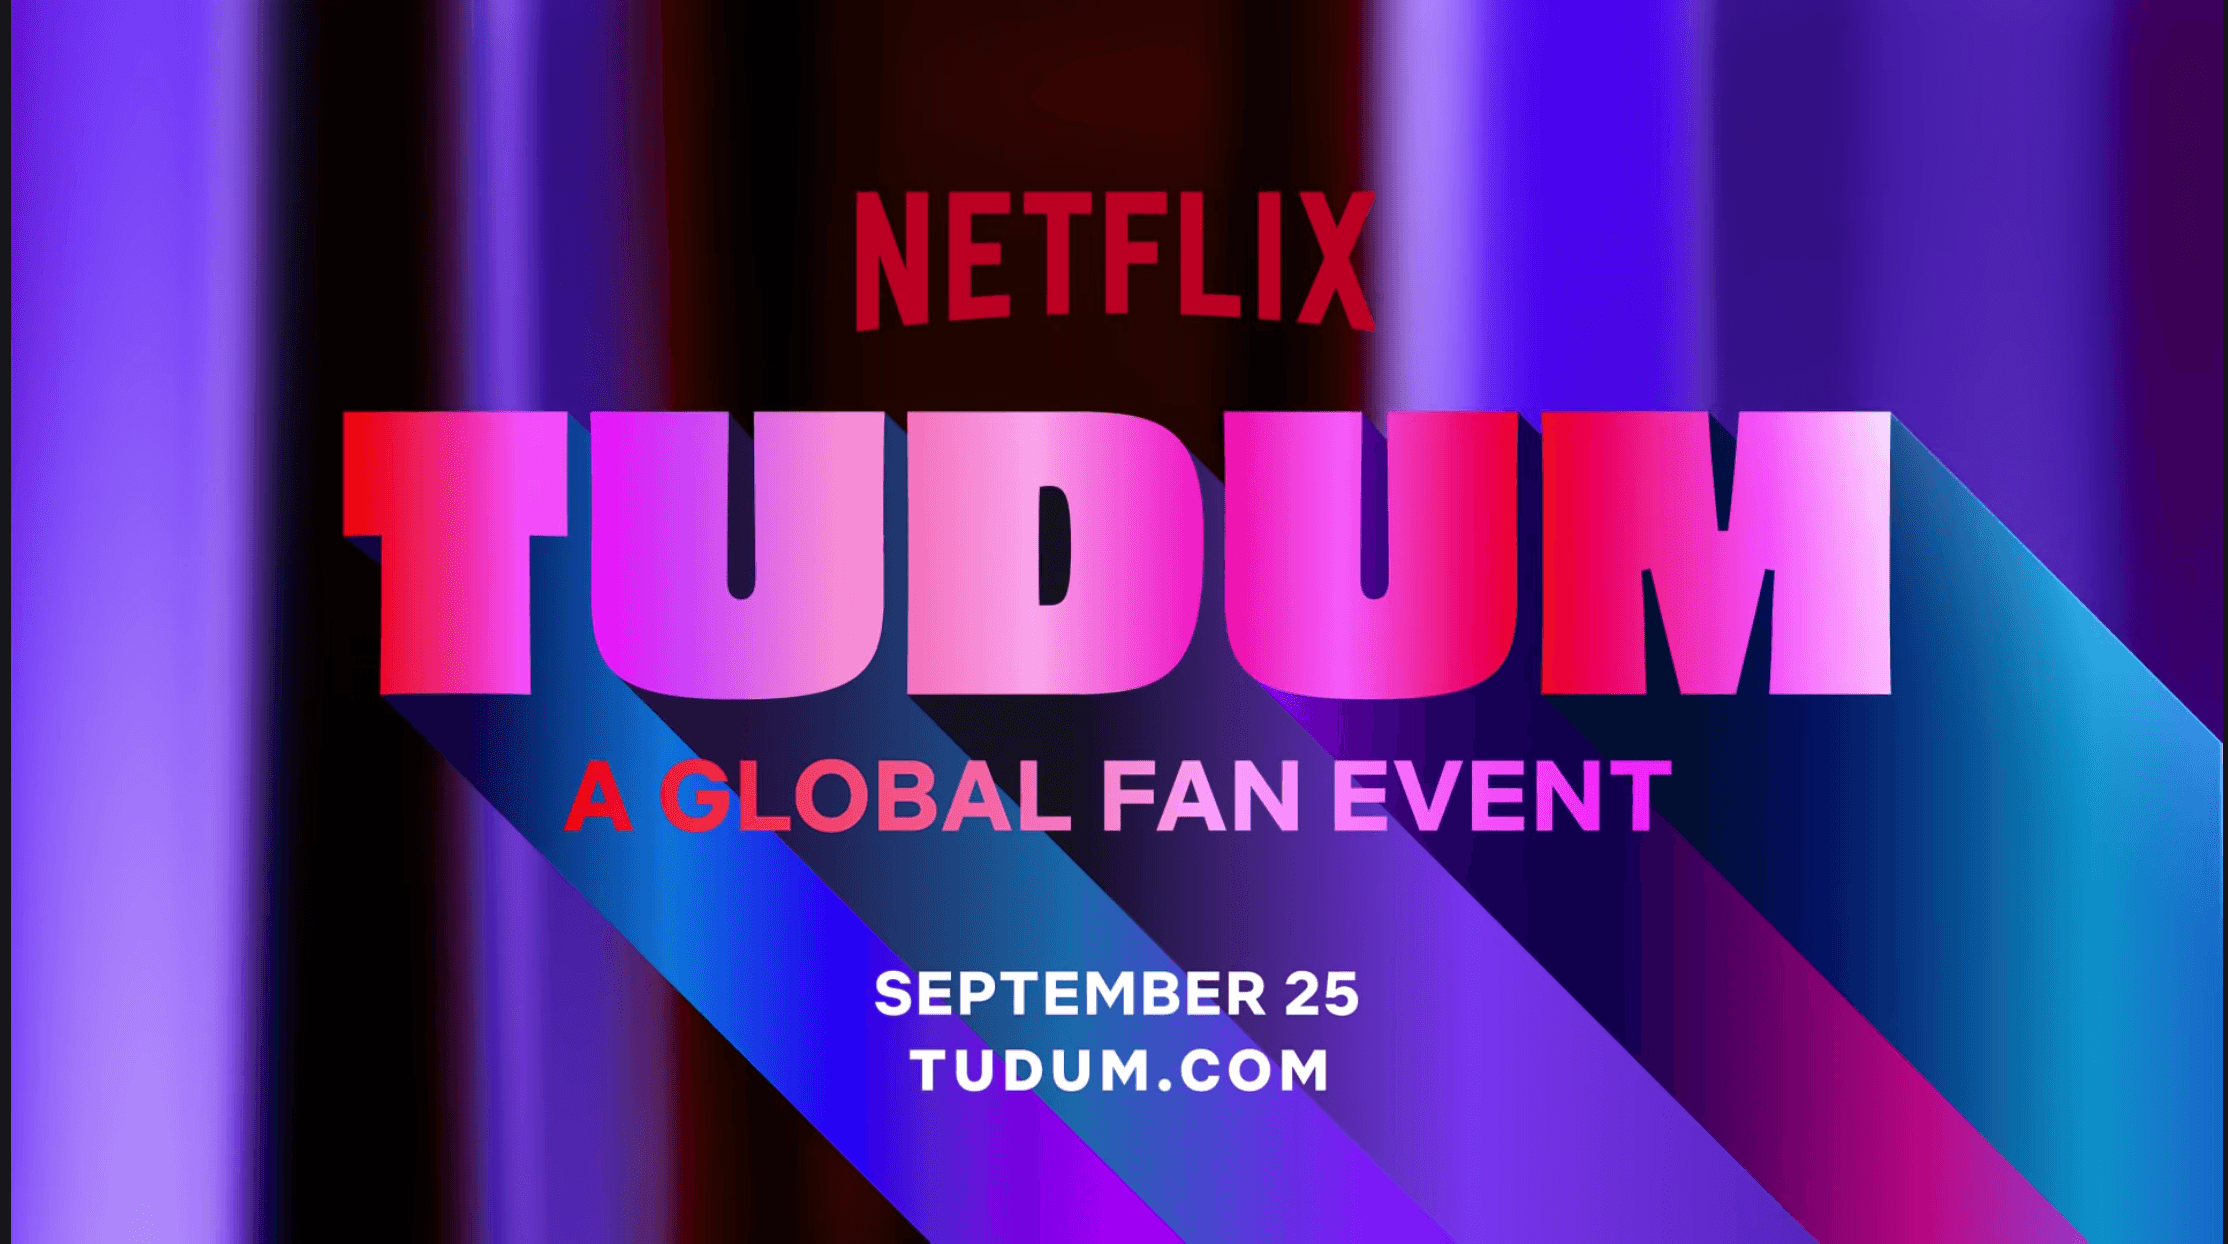 Netflix Announces Star-Studded “Tudum” Fan Event Featuring First Looks at ‘The Witcher,’ ‘Ozark’ and More